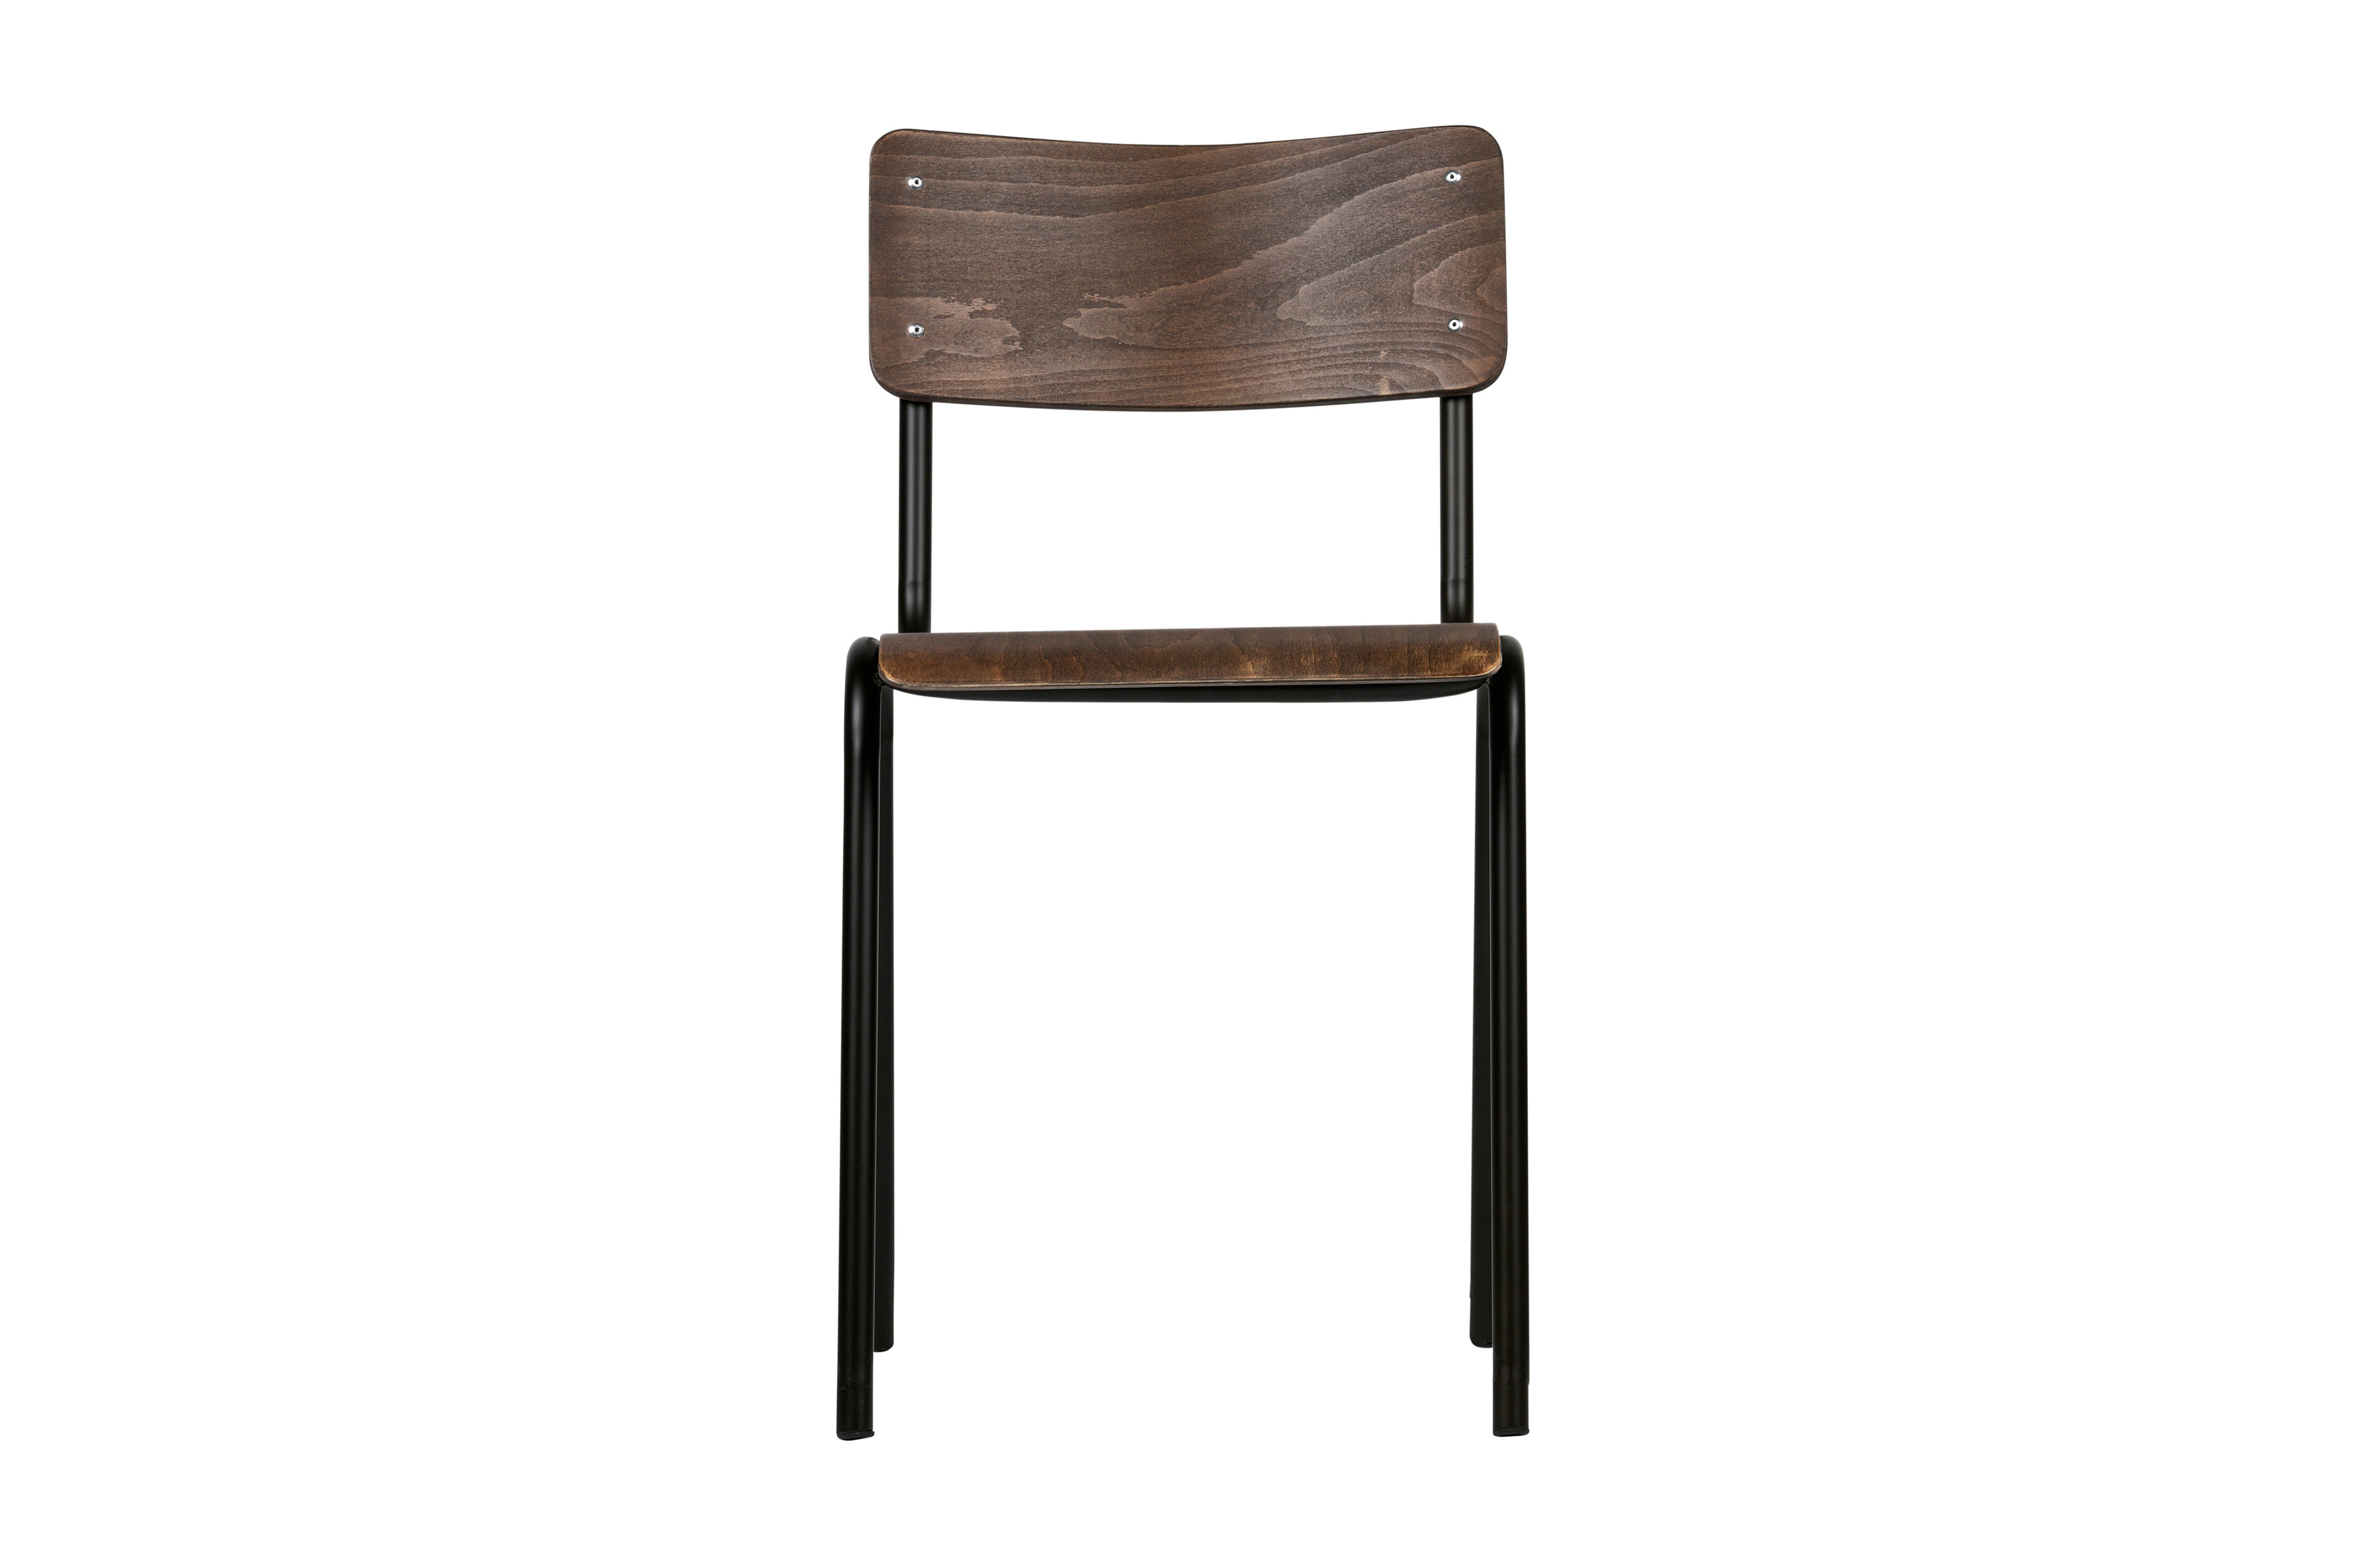 Rent a School chair Kees brown? Rent at KeyPro furniture rental!